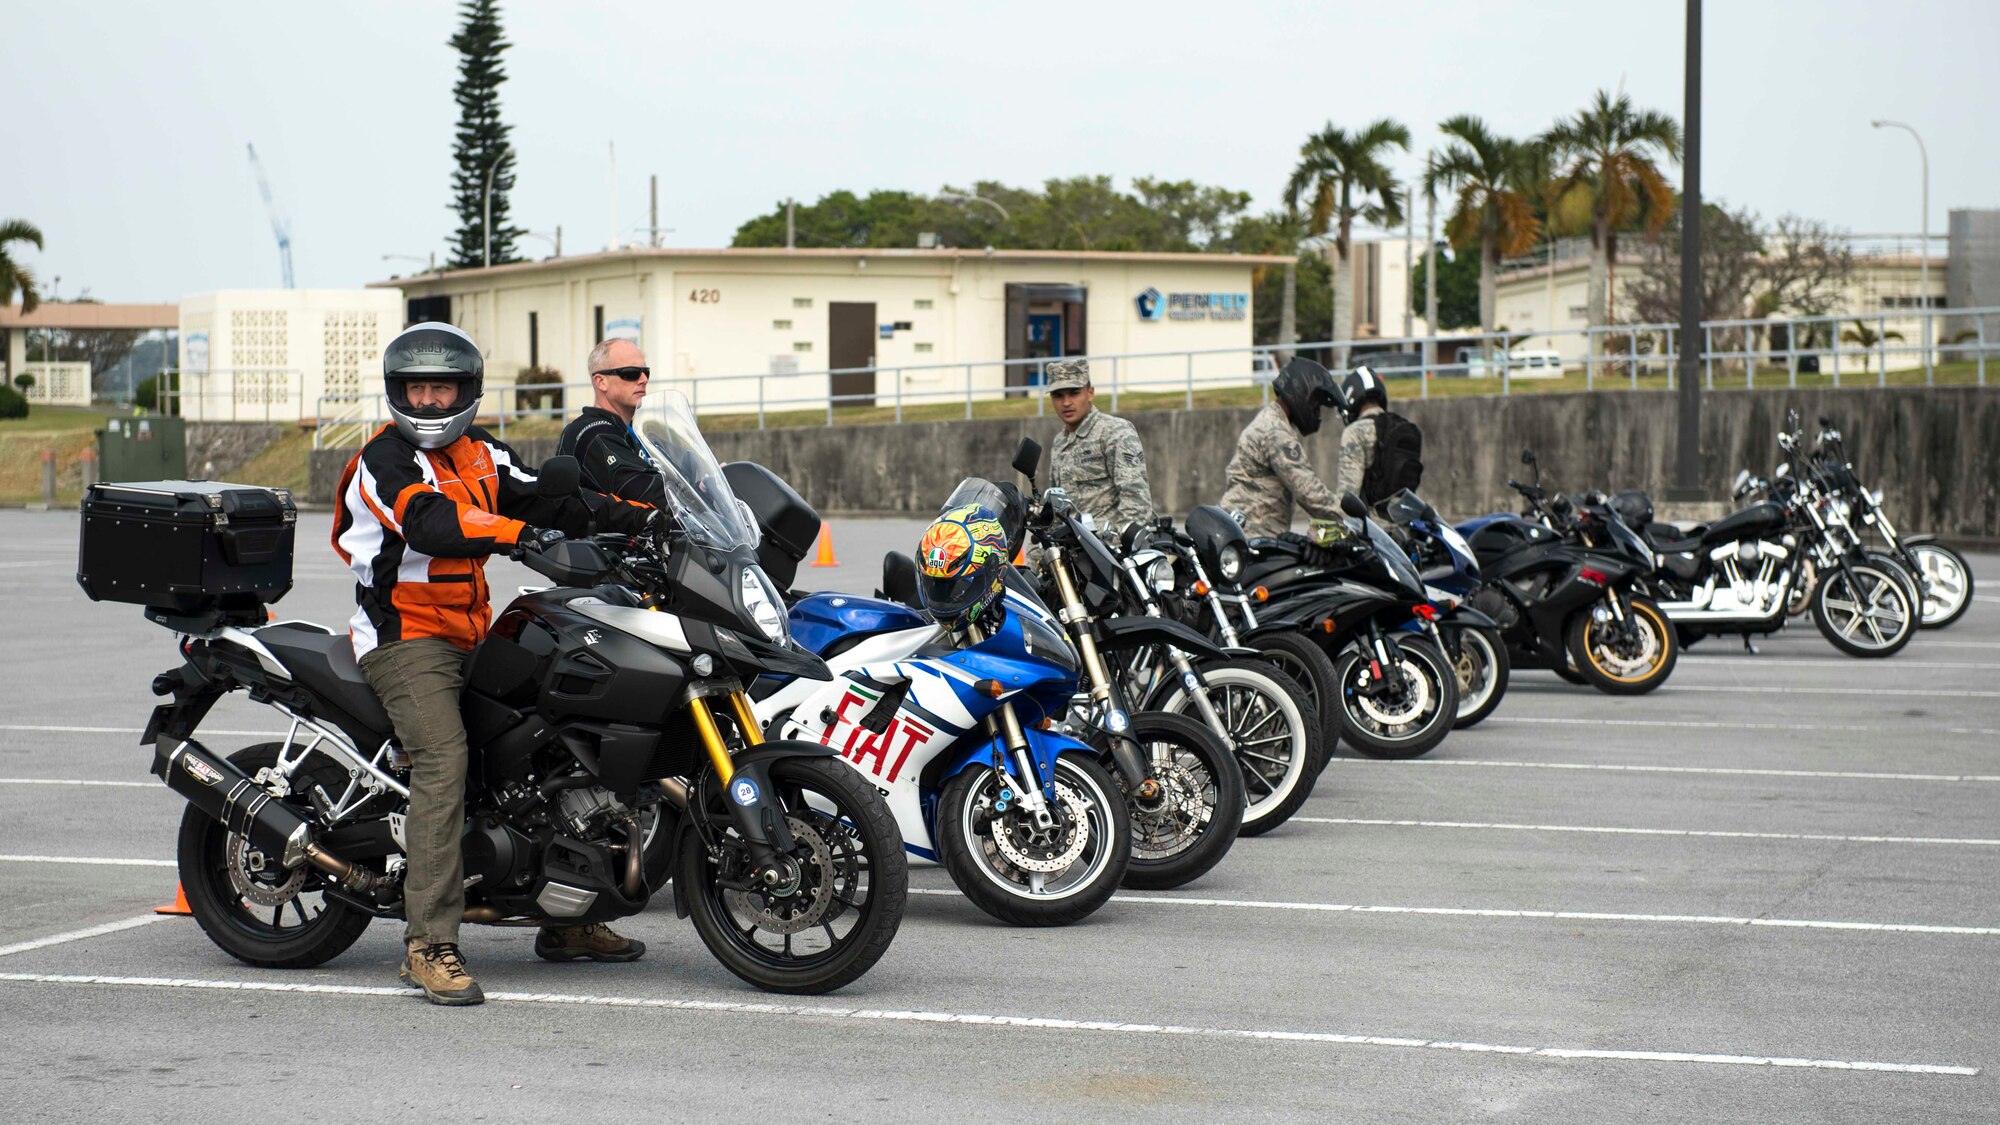 Riders stationed on Okinawa gear up for a motorcycle skills test course during an 18th Wing annual motorcycle safety brief March 9, 2017, at Kadena Air Base, Japan. Wing Safety and the Green Knights chapter 138 organized the event and reinforced safety riding standards for riders stationed on Okinawa. (U.S. Air Force photo by Staff Sgt. Peter Reft/Released)